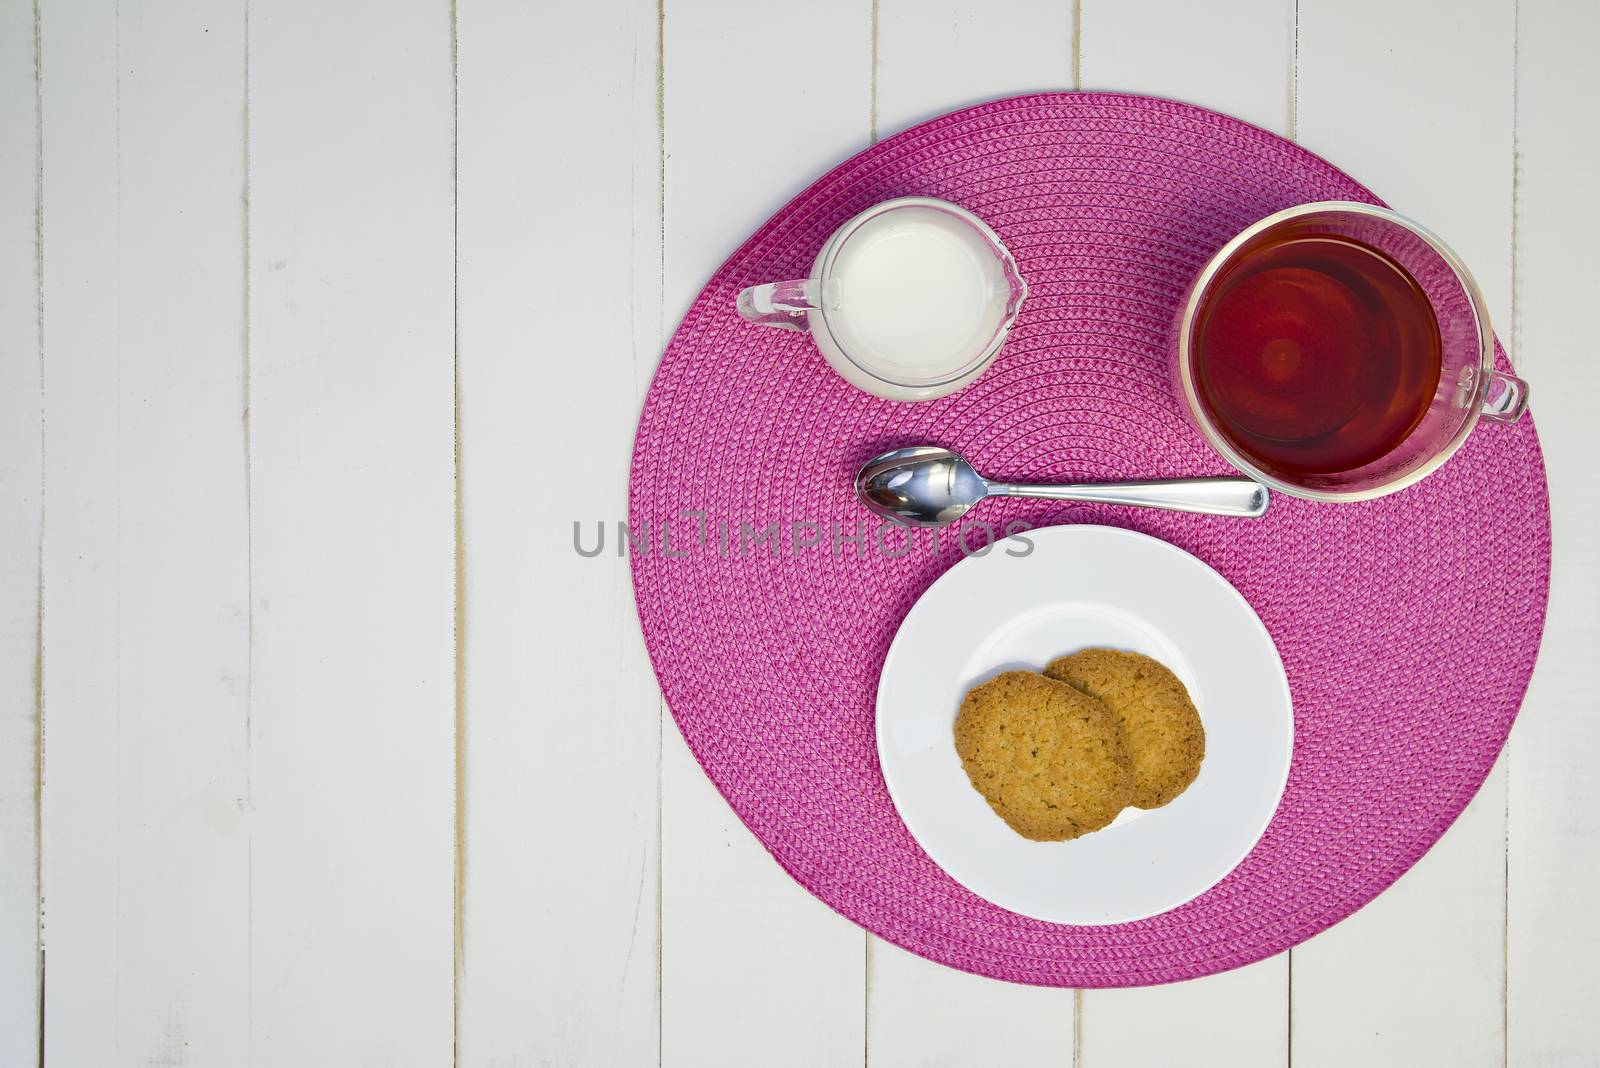 Hot tea, cookies, and milk are arranged on a pink placemat on a white board table. The arrangement is off-center.